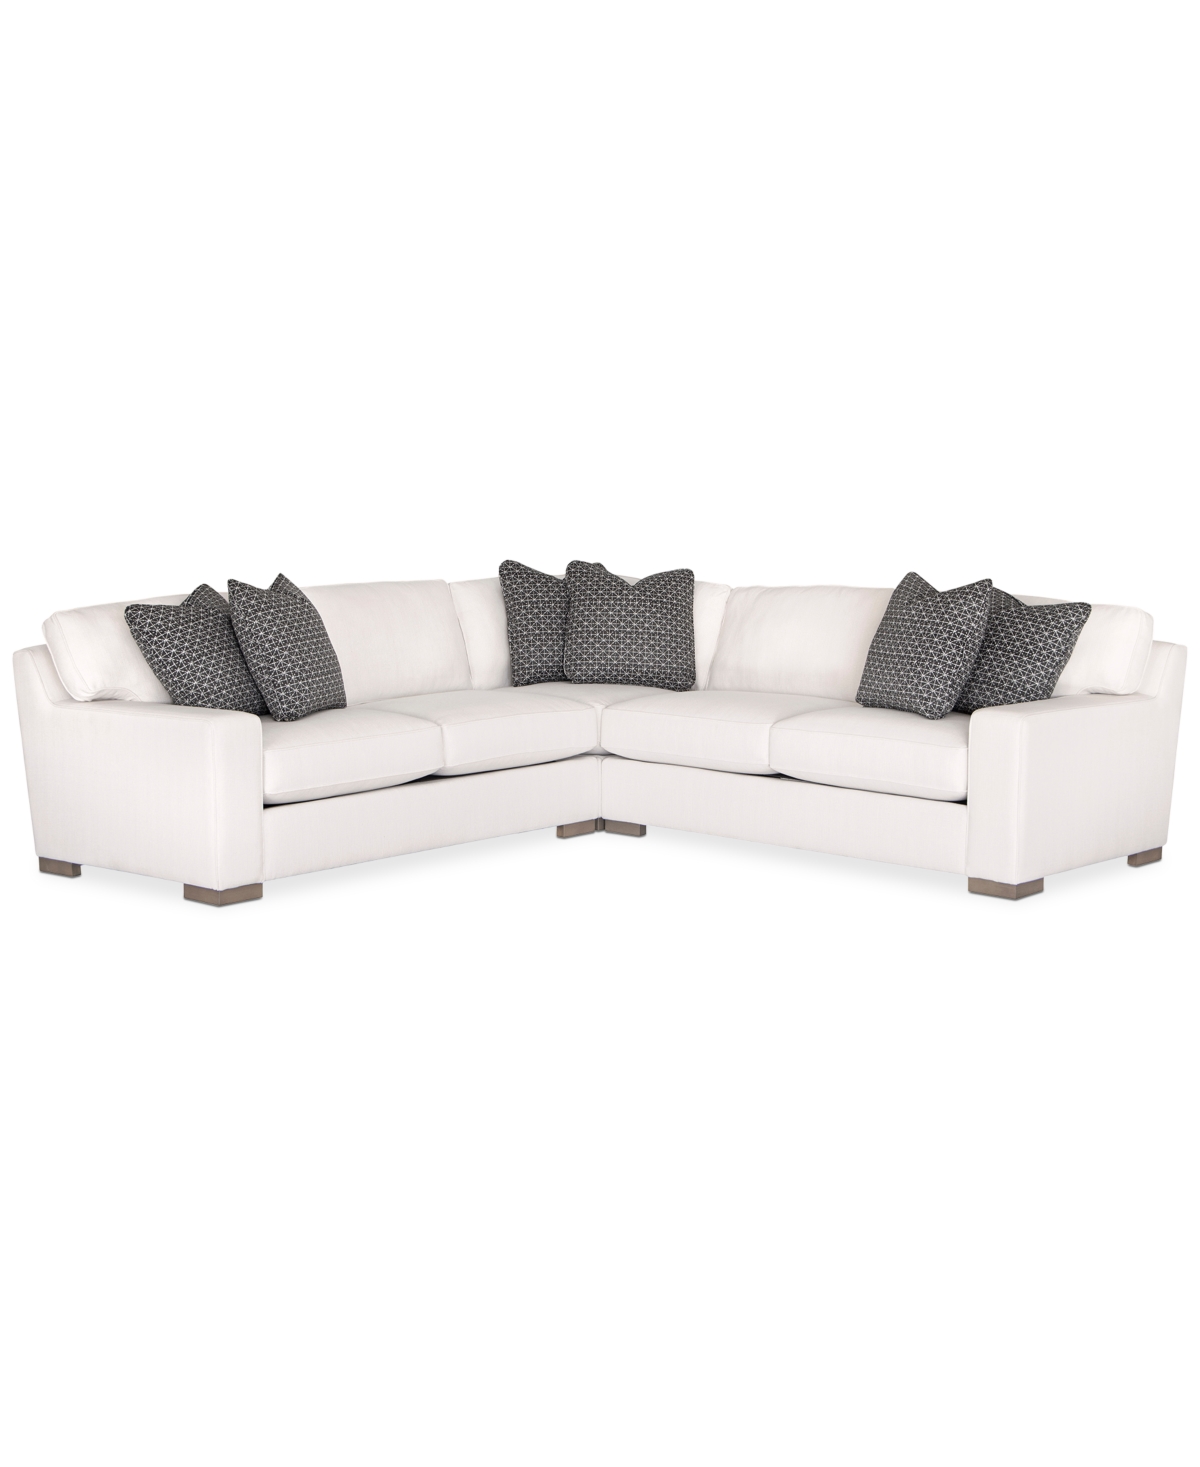 Doverly 3-Pc. Fabric Sectional, Created for Macys